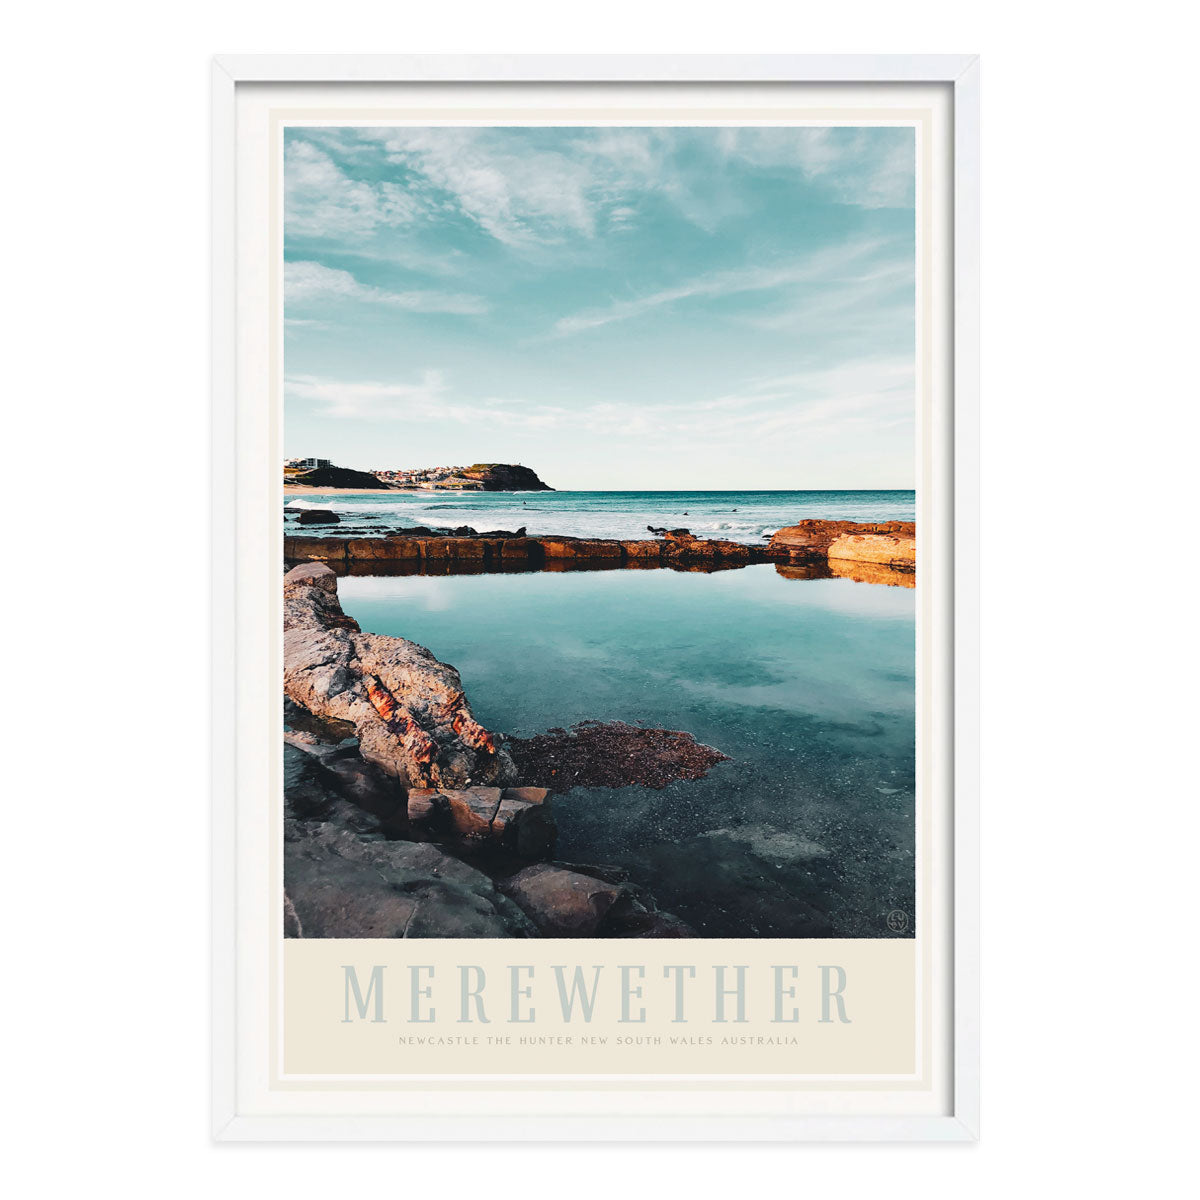 Merewether Beach vintage retro travel poster print in white frame from Places We Luv